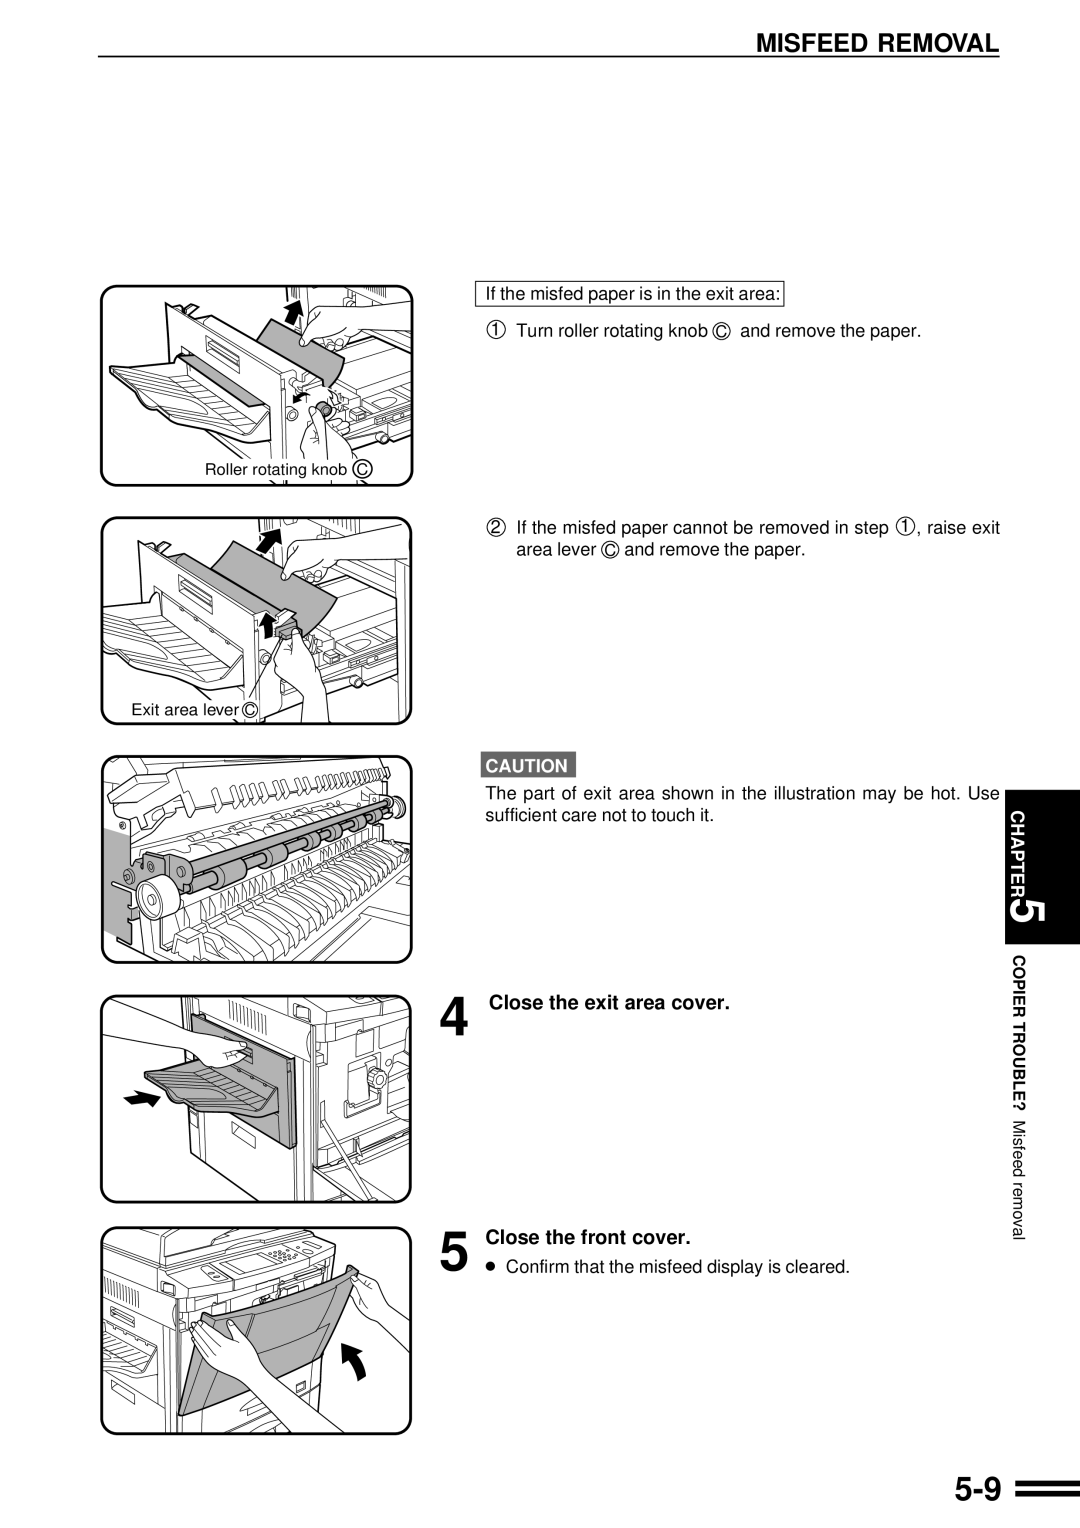 Sharp AR-507 operation manual Misfeed Removal, Close the exit area cover Close the front cover 